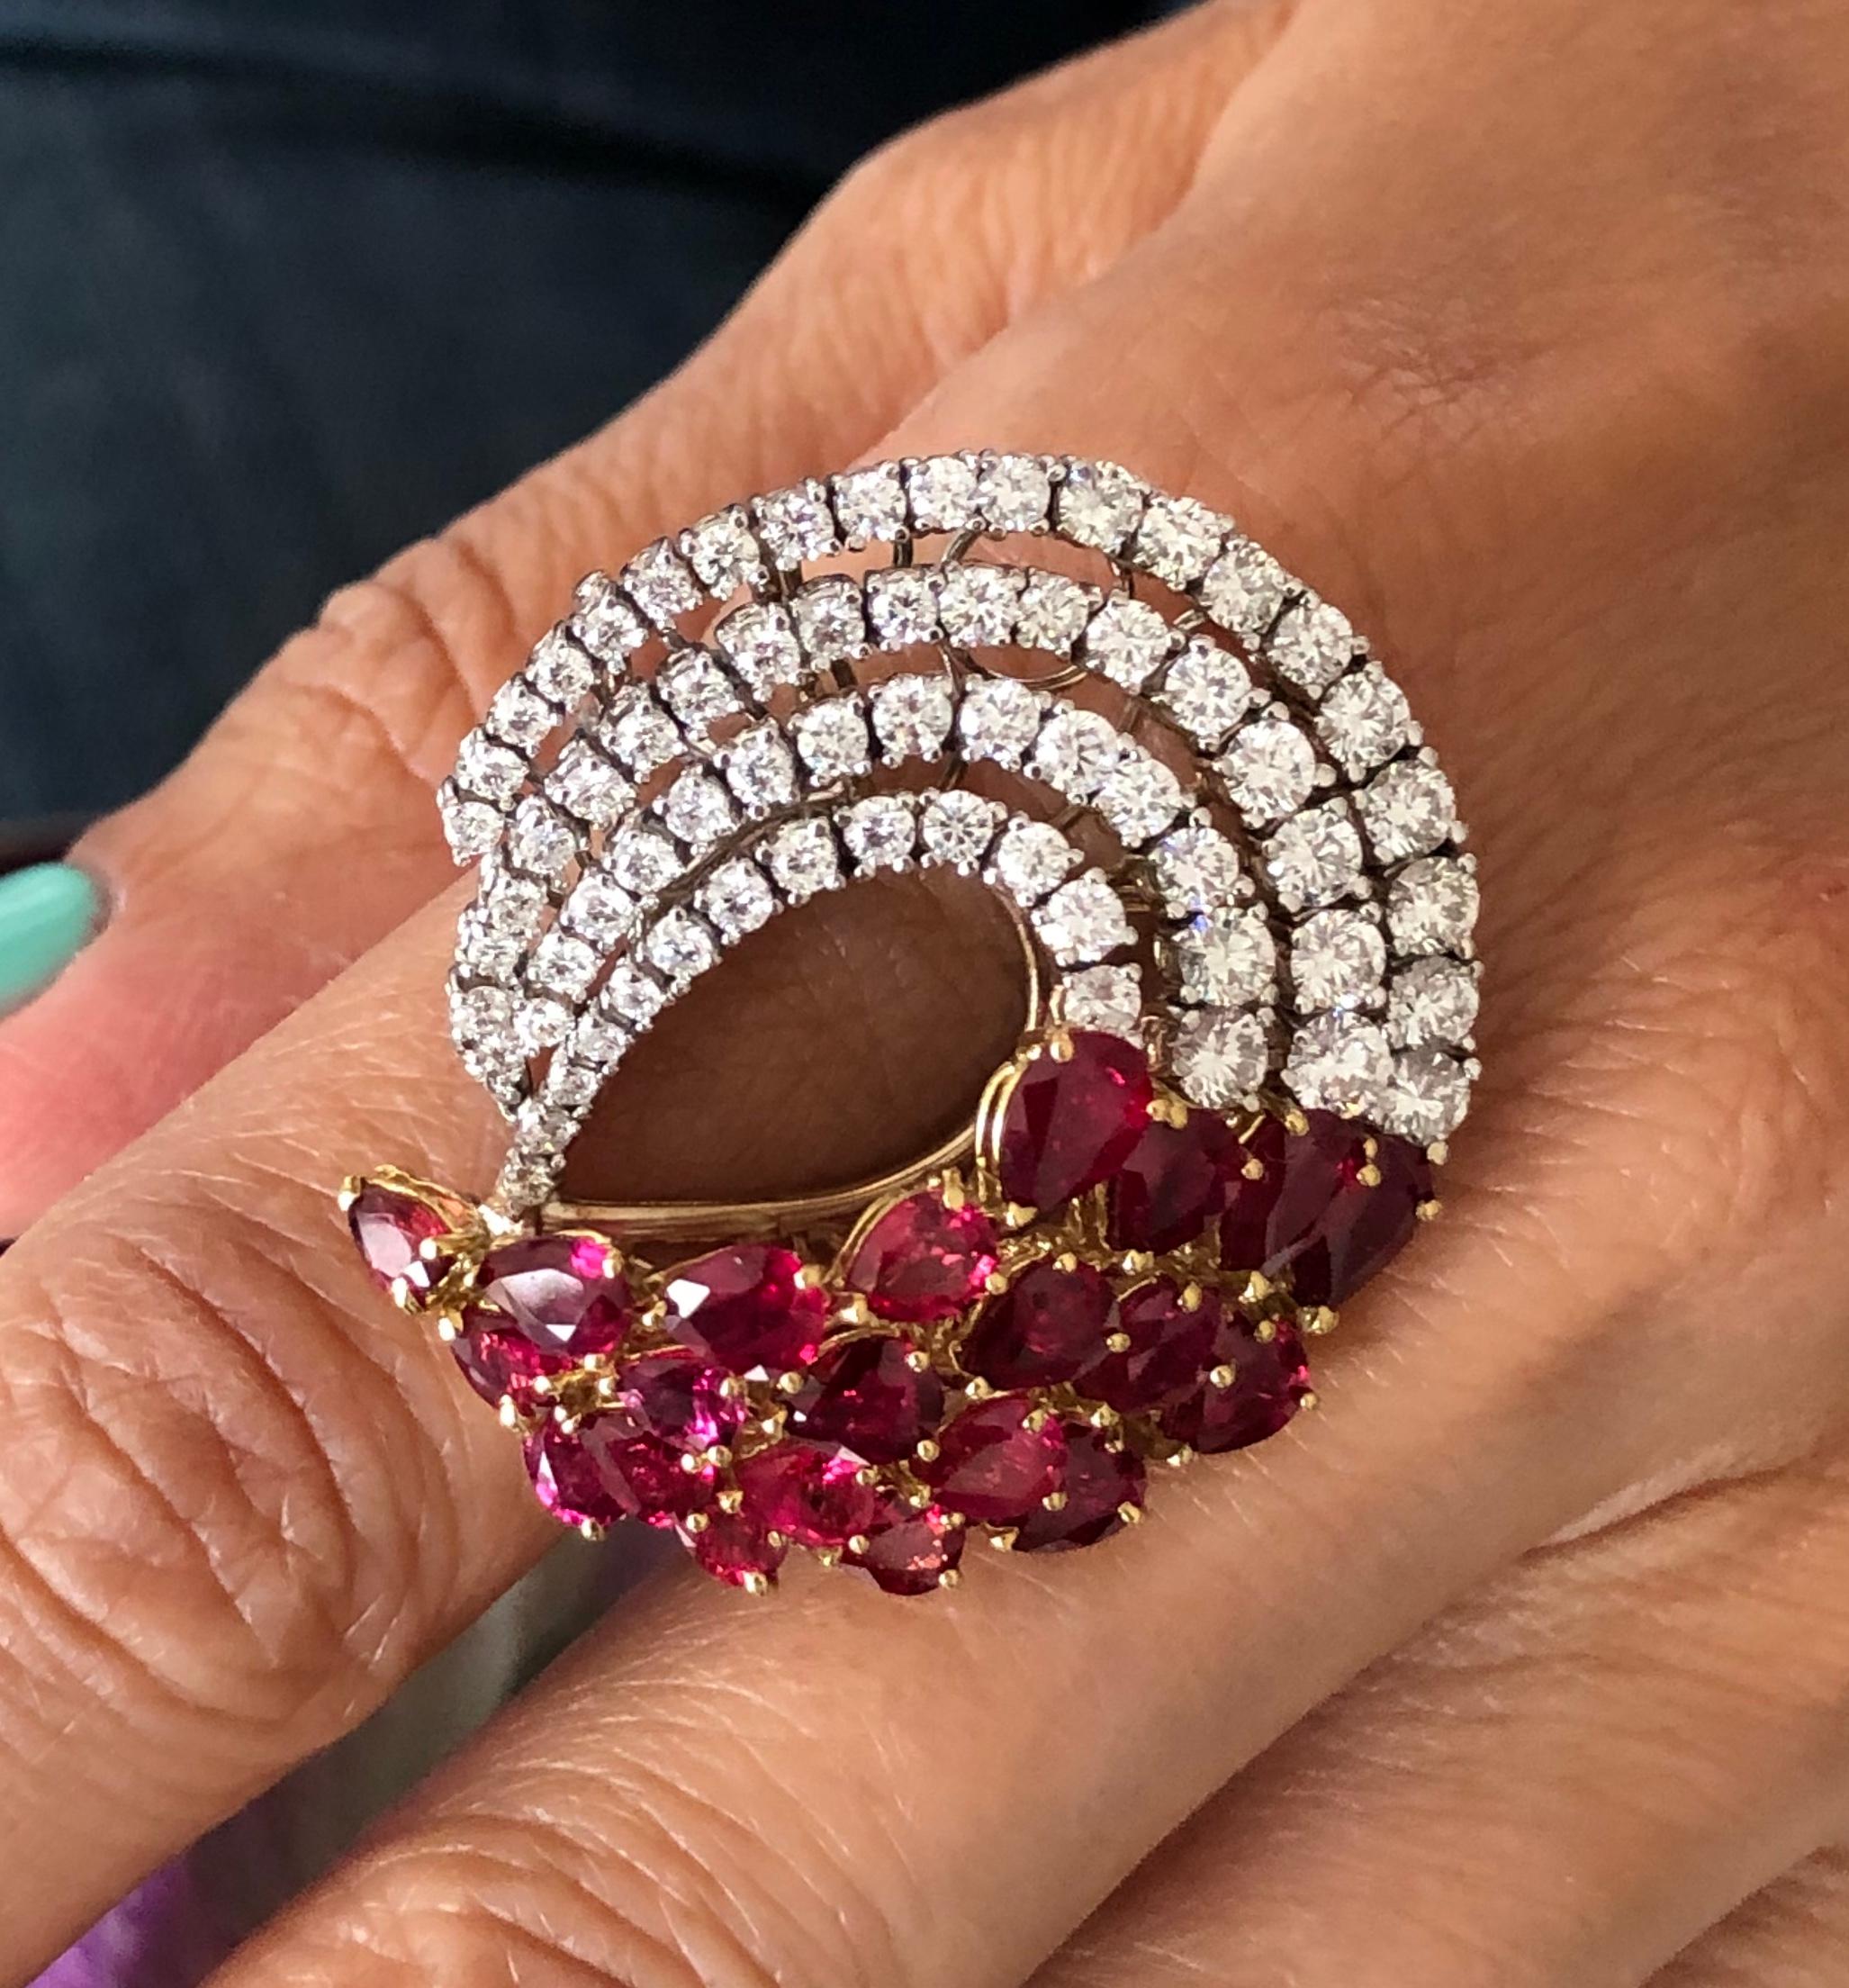 Offered here is a unique Ruby & diamonds ring set in 18kt two ( 2 ) tone gold. The ring measures approximately 1.5” x 1.5” on top and the shank graduates down from 3.60 mm to 2.90 mm. The ring is marked 750 and weighs 16.80 grams with a finger size